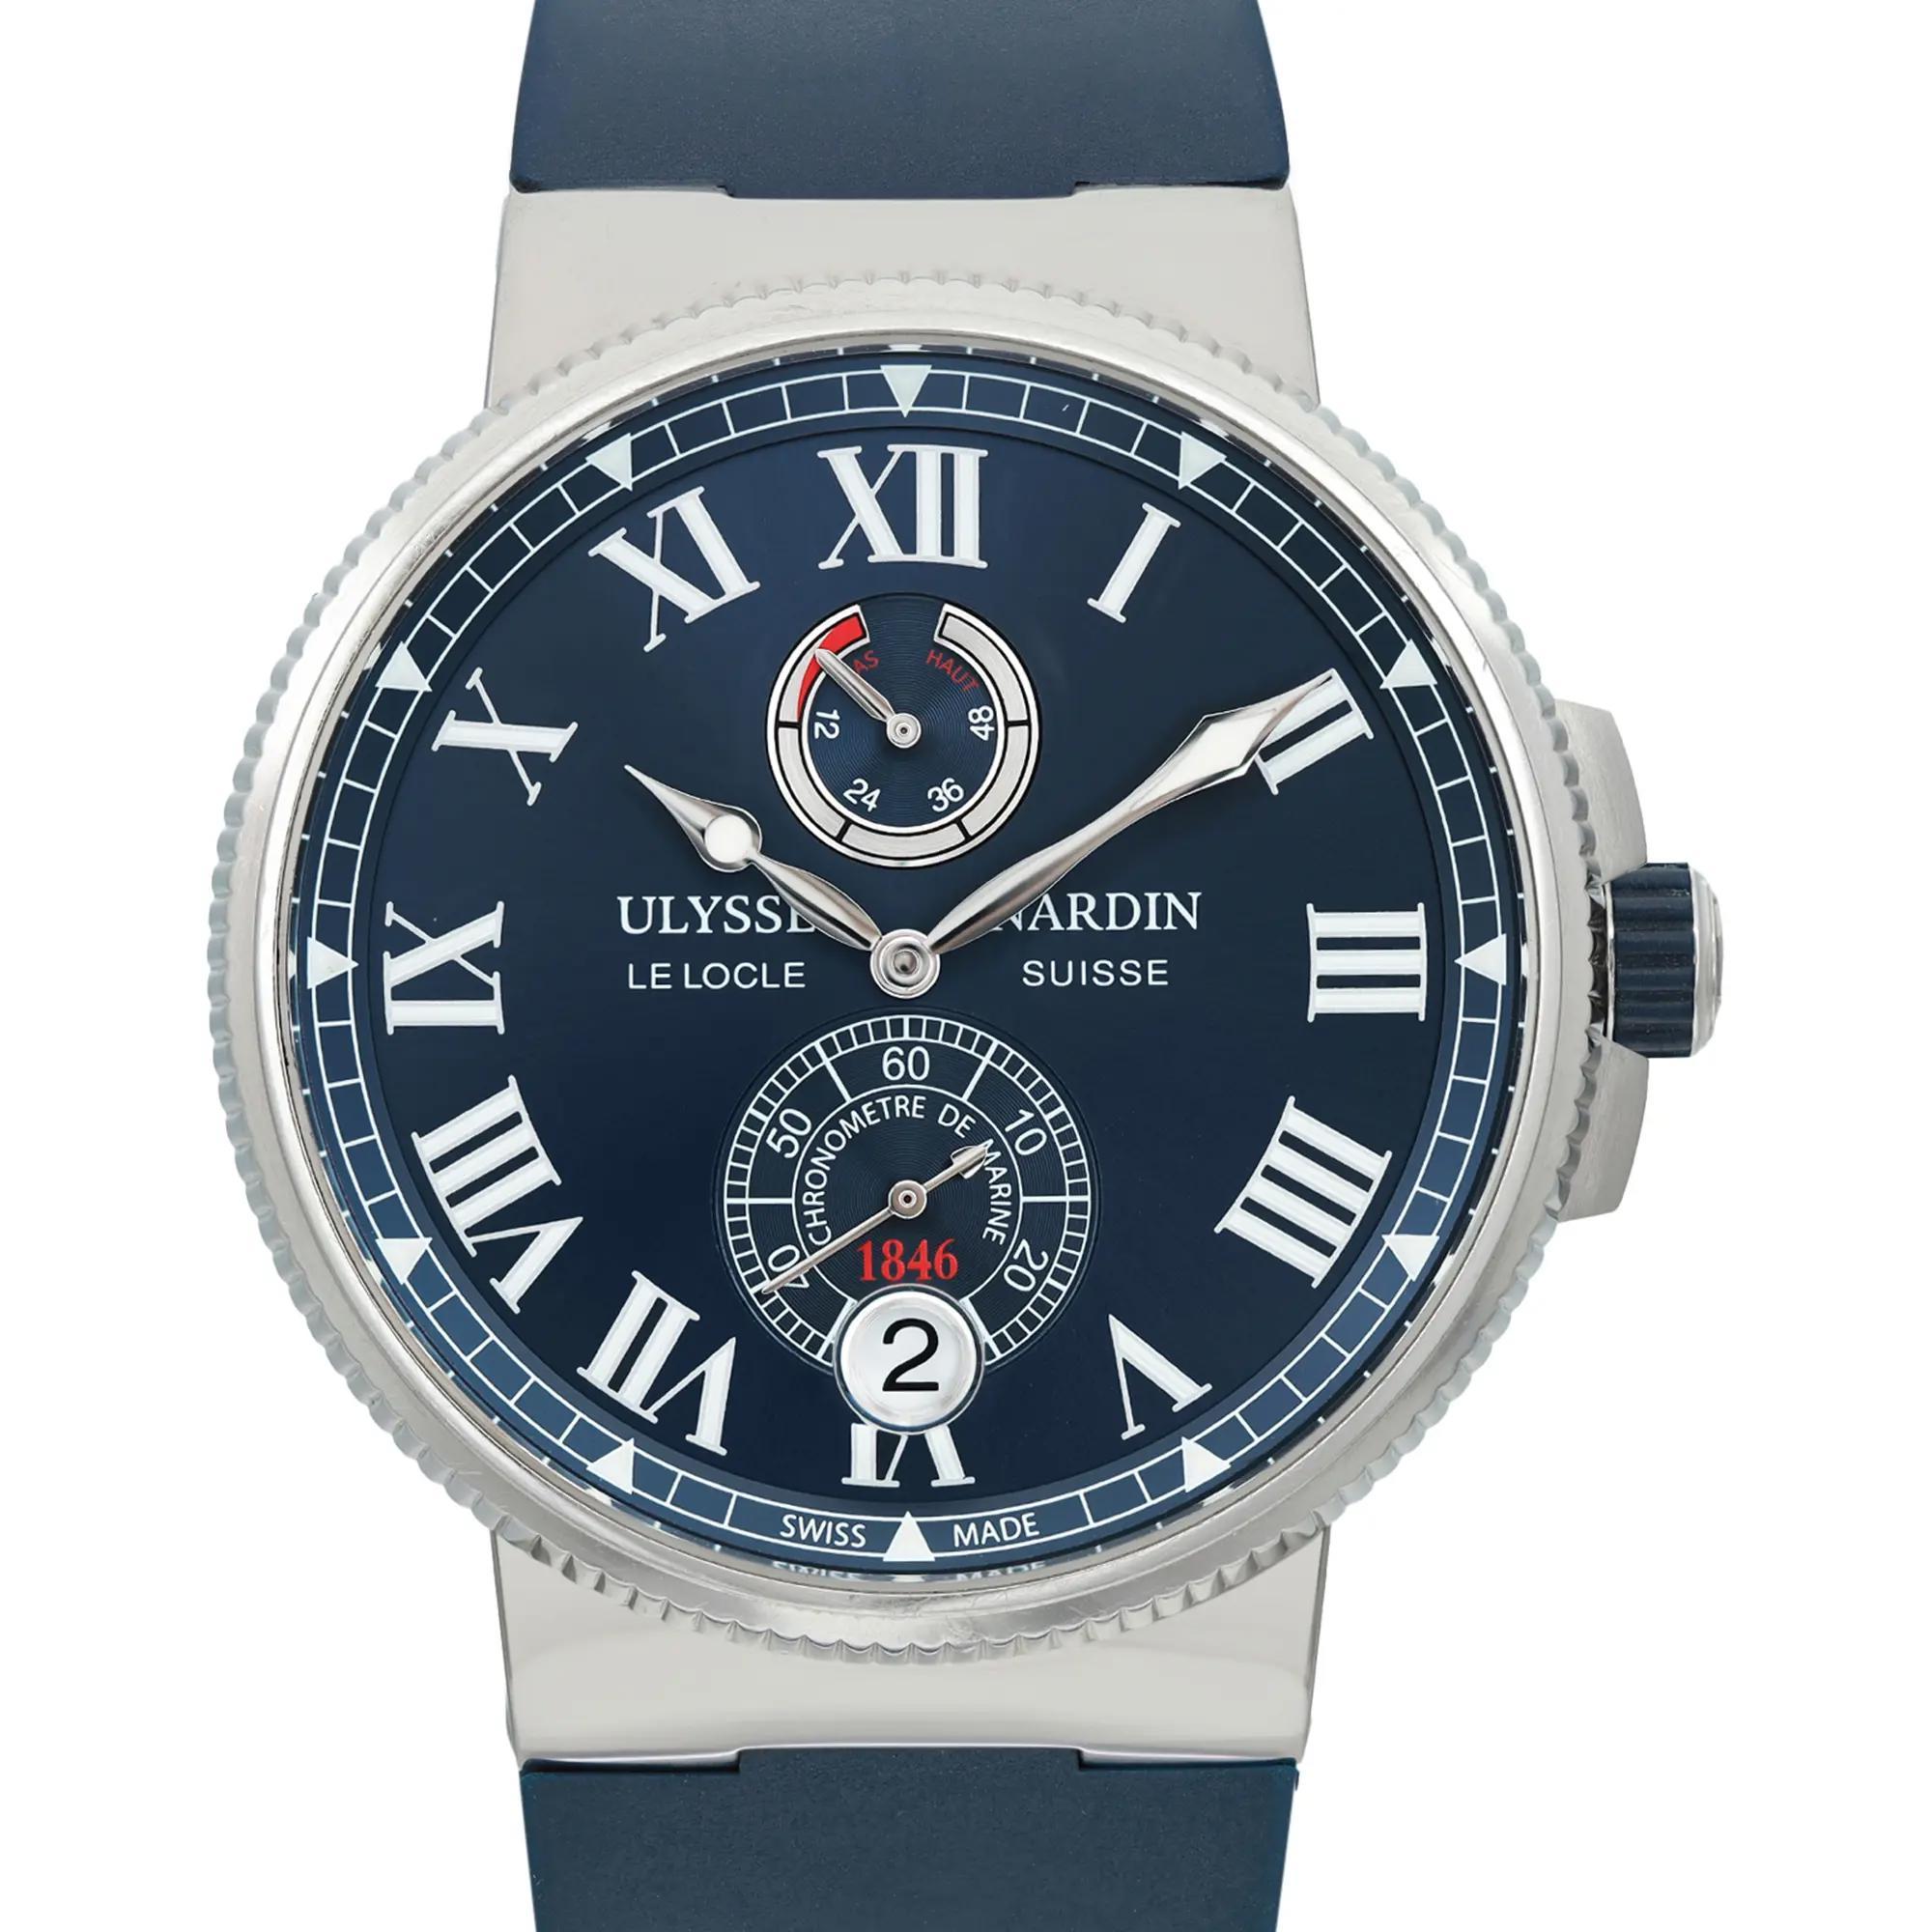 Pre-owned. Good condition. 2019 Card. Light scratches. Comes with the gift box. 2 year warranty. 

Brand and Model Information:
Brand: Ulysse Nardin
Model: Ulysse Nardin Marine
Model Number: 1183-122/43

Type and Style:
Type: Wristwatch
Style: